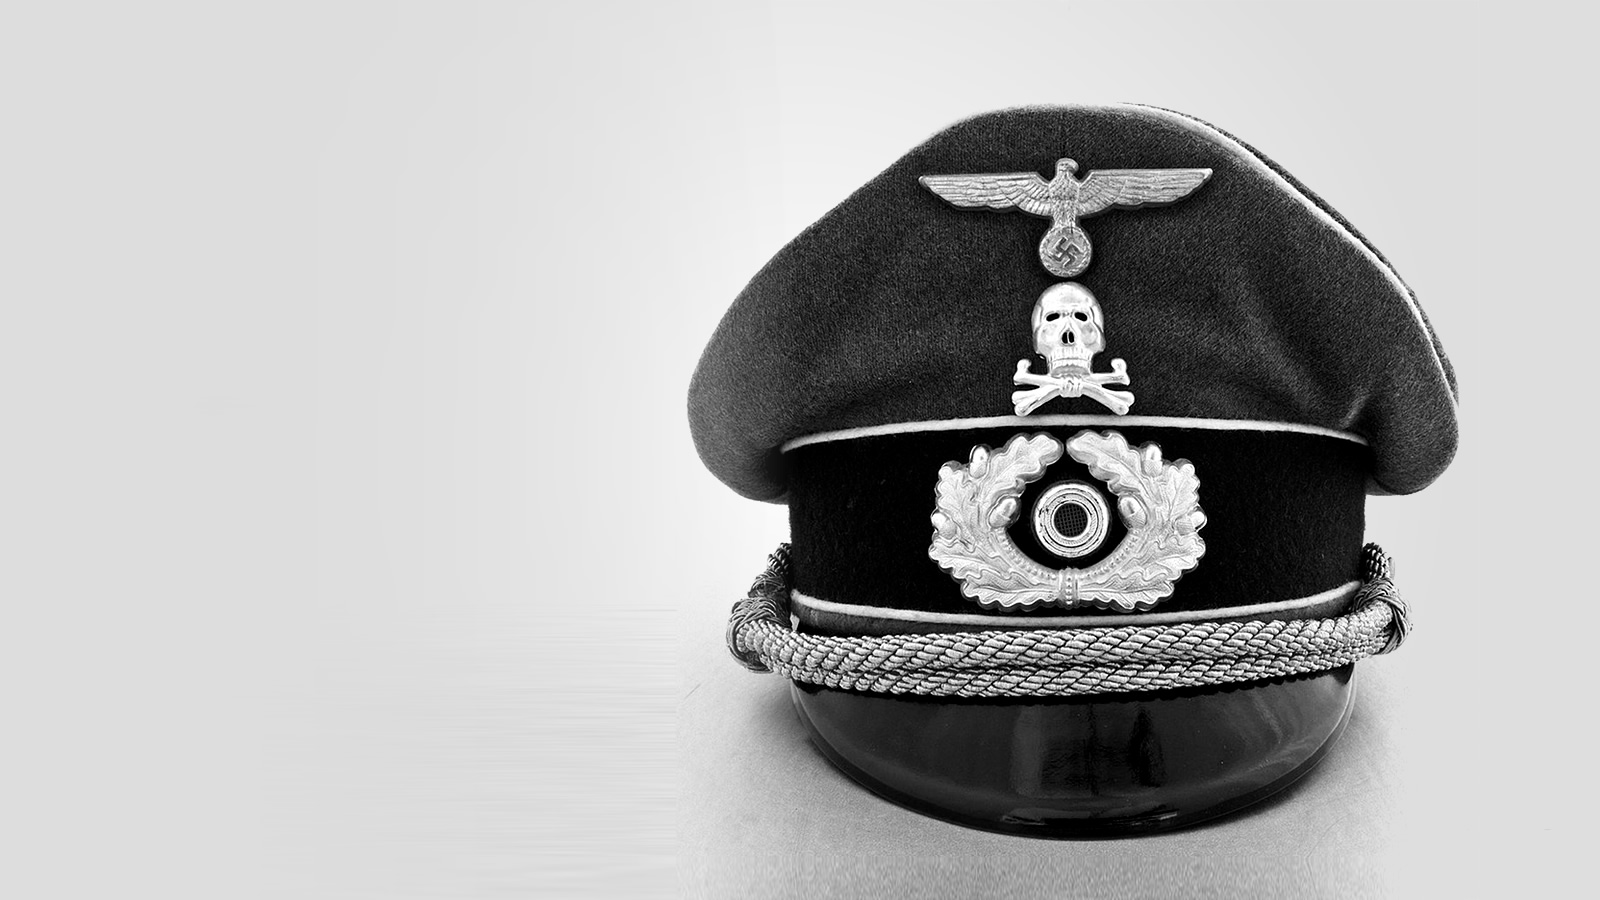 A peaked cap from the uniform of a Nazi officer